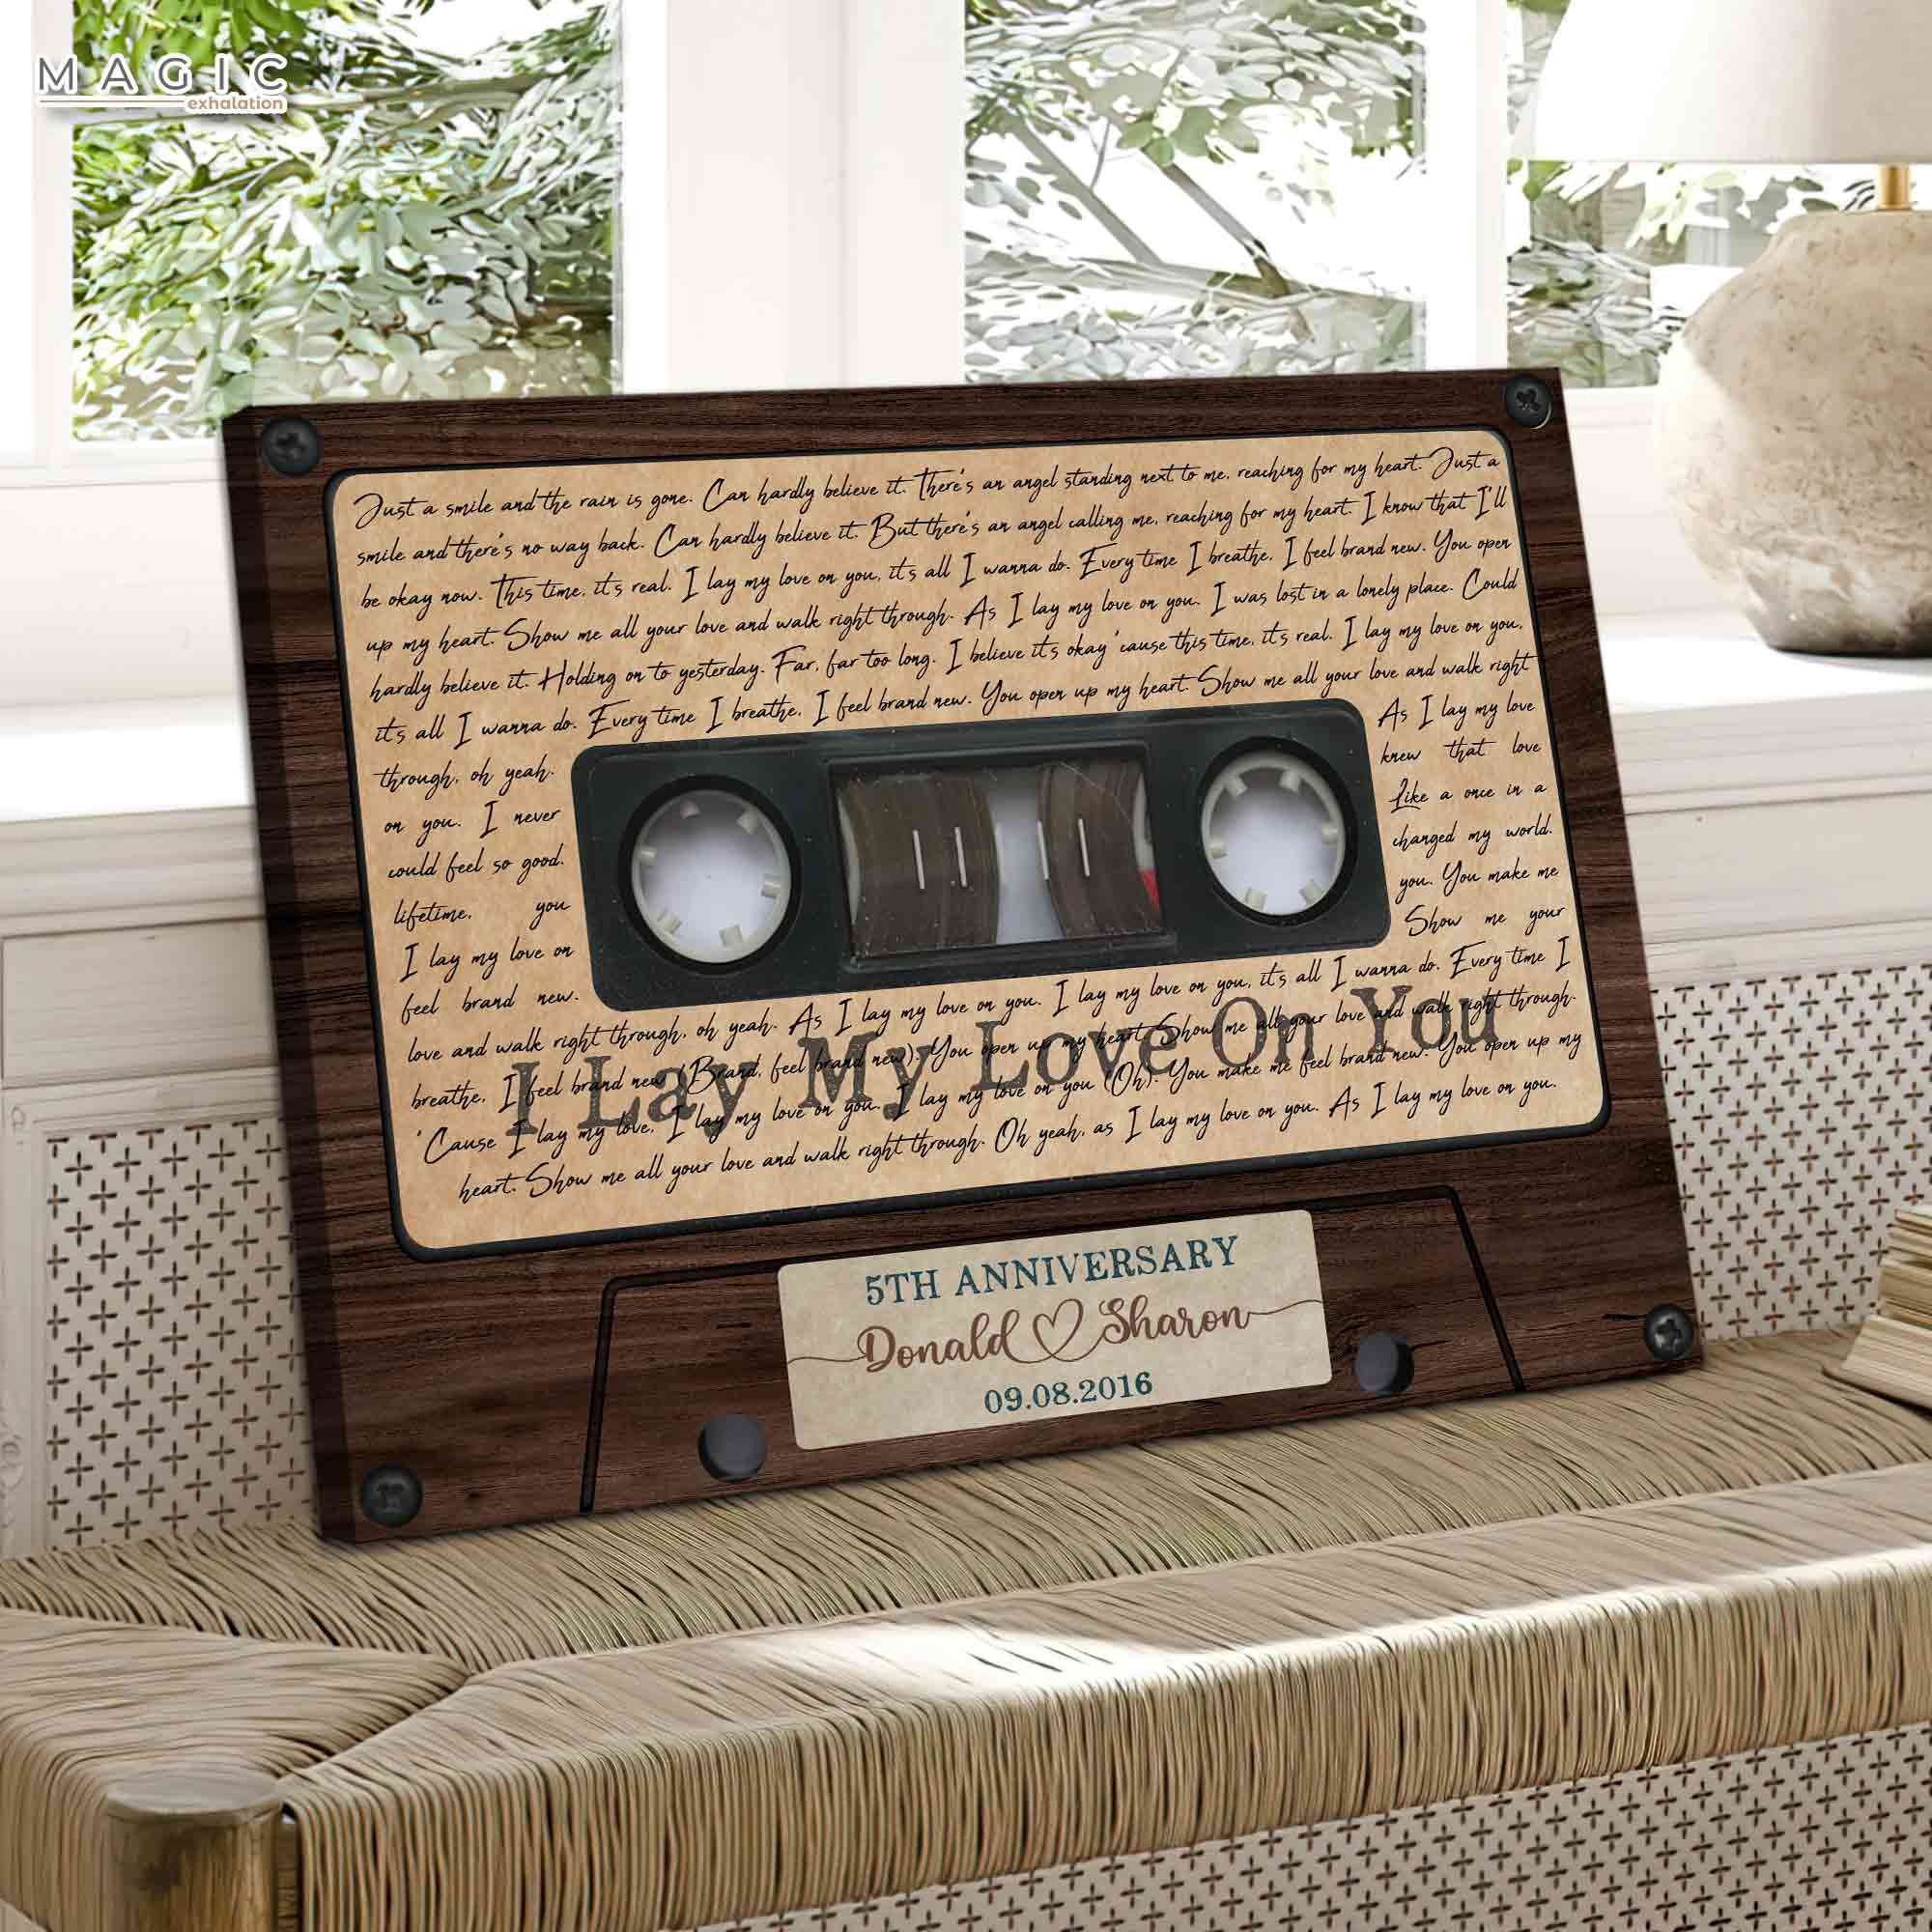 gift ideas for wood anniversary, ideas for wooden anniversary gifts